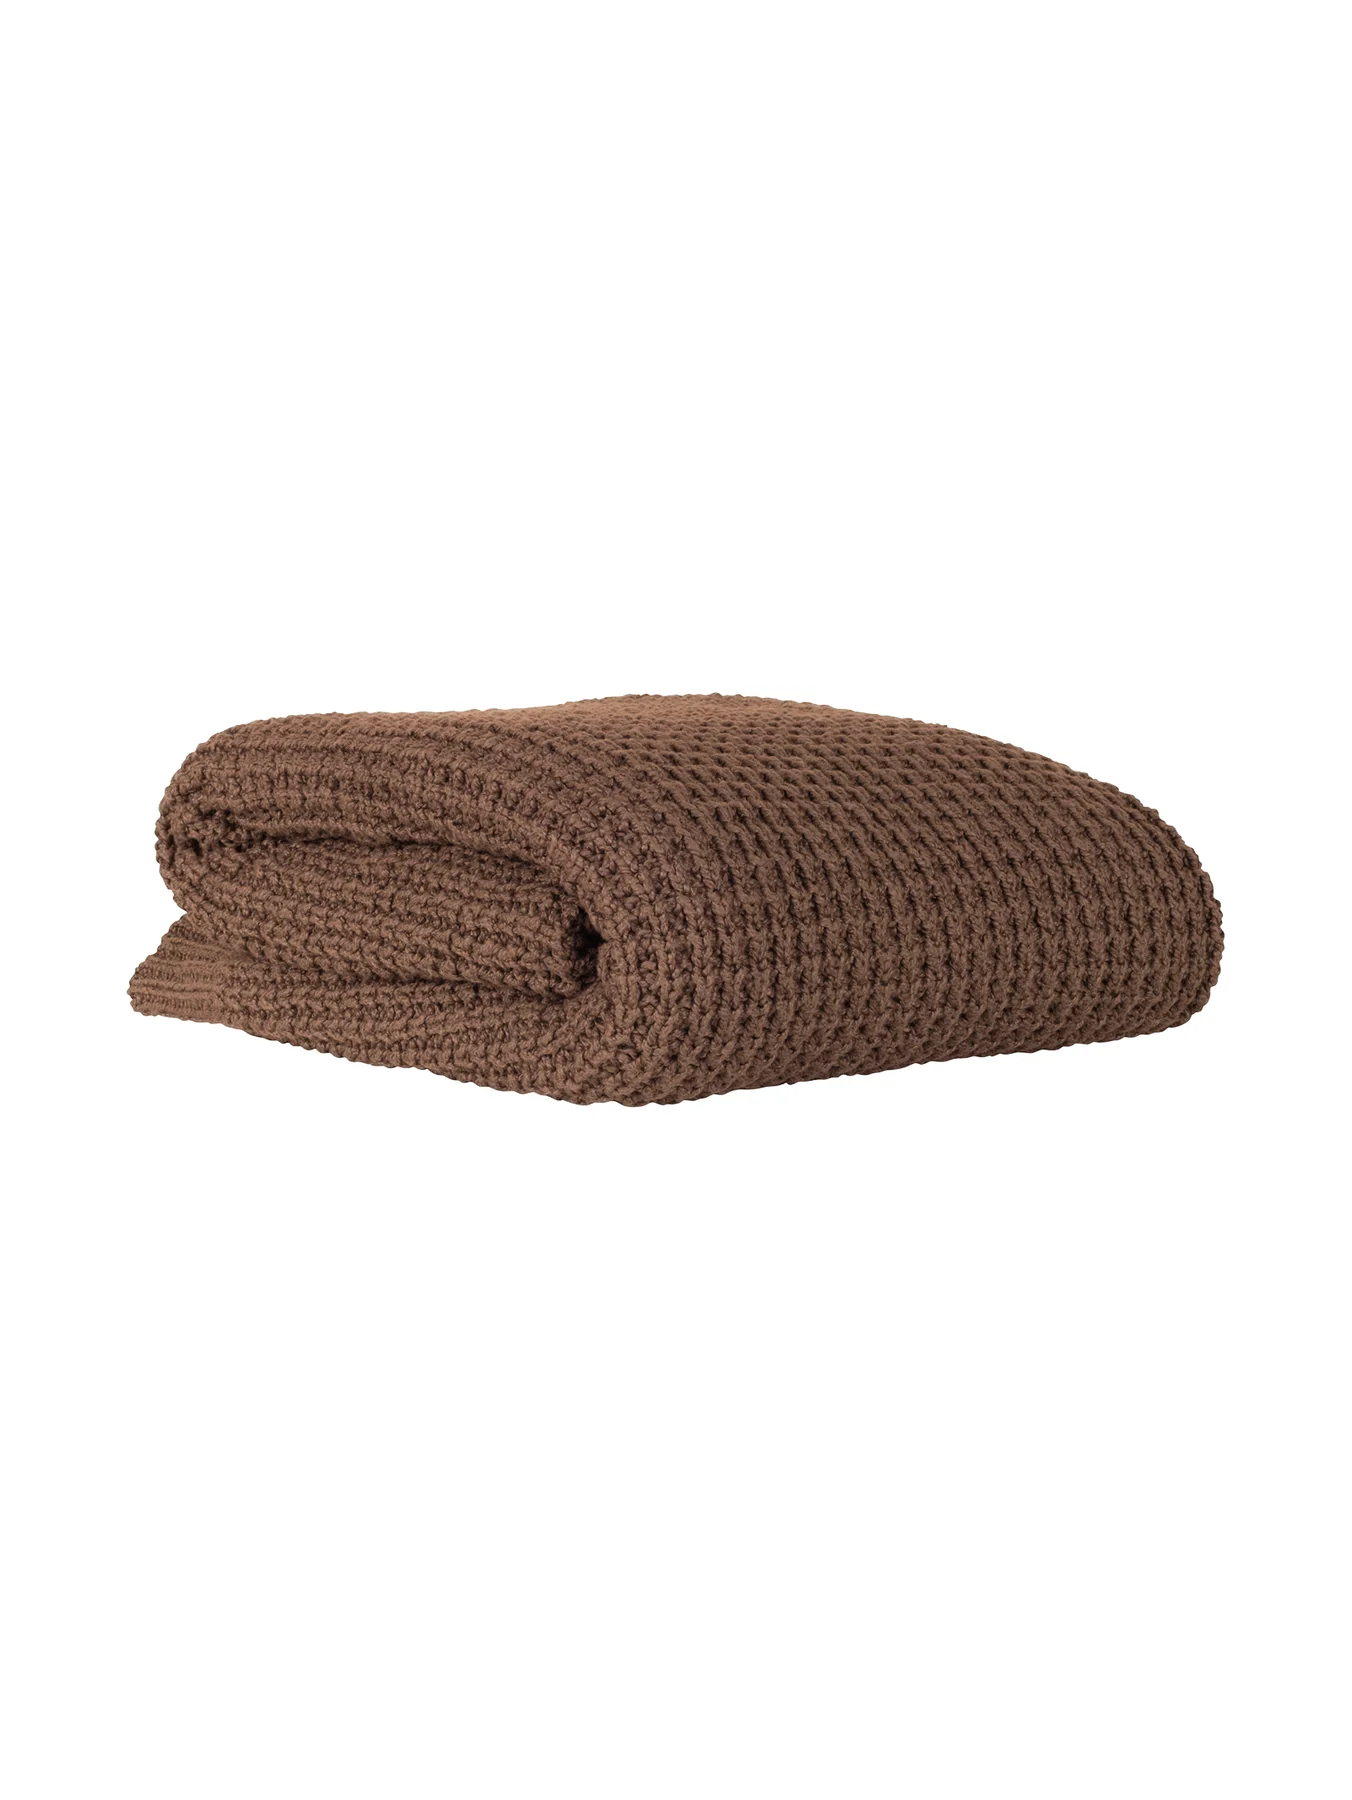 a brown blanket folded on a white background